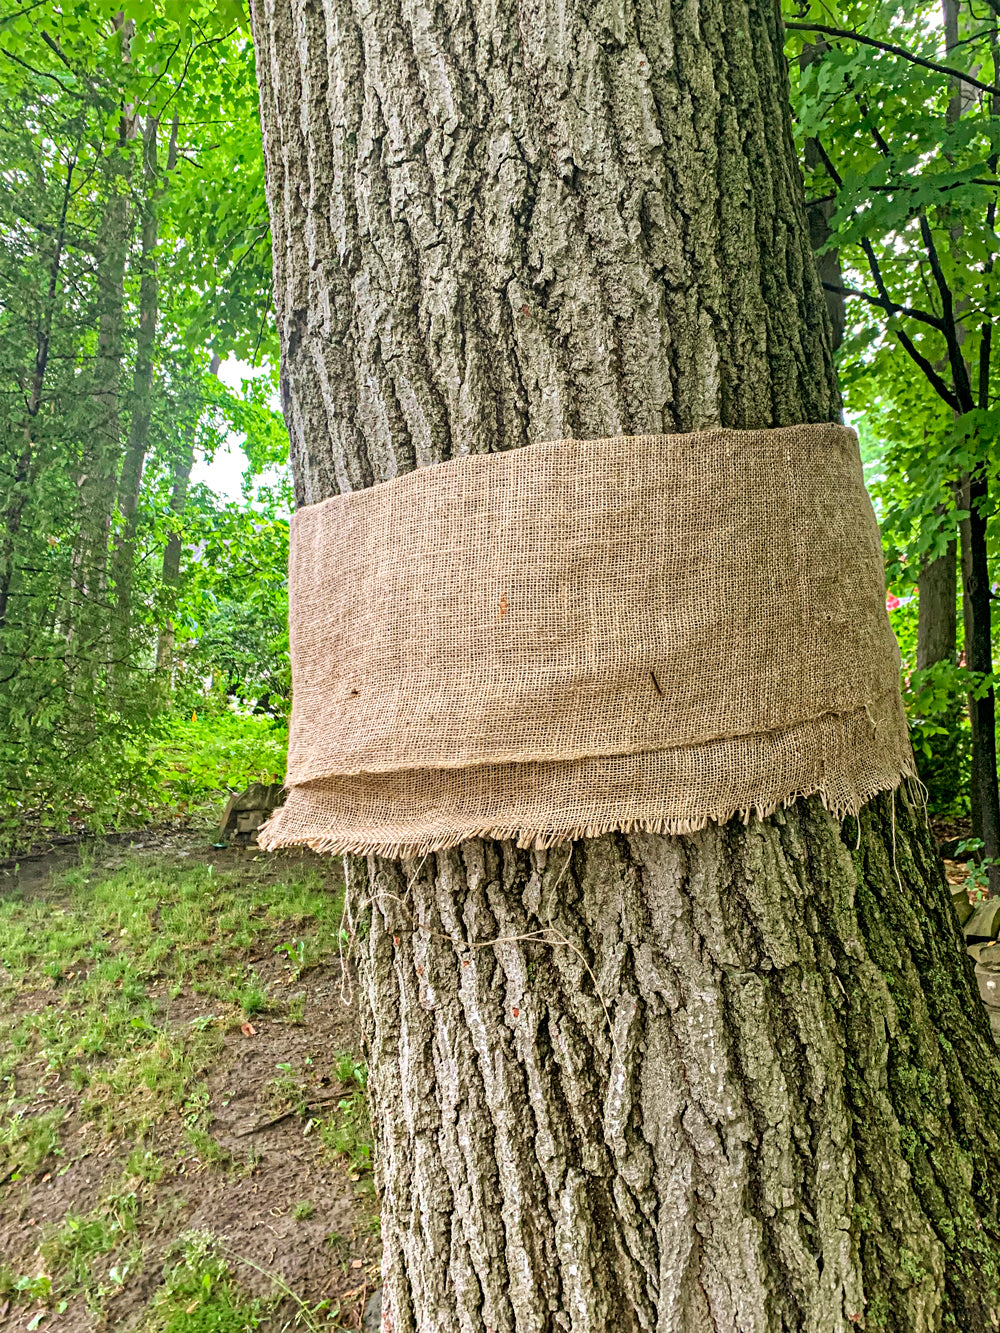 How to Control Invasive Spongy Moths by Wrapping Your Trees with Burlap